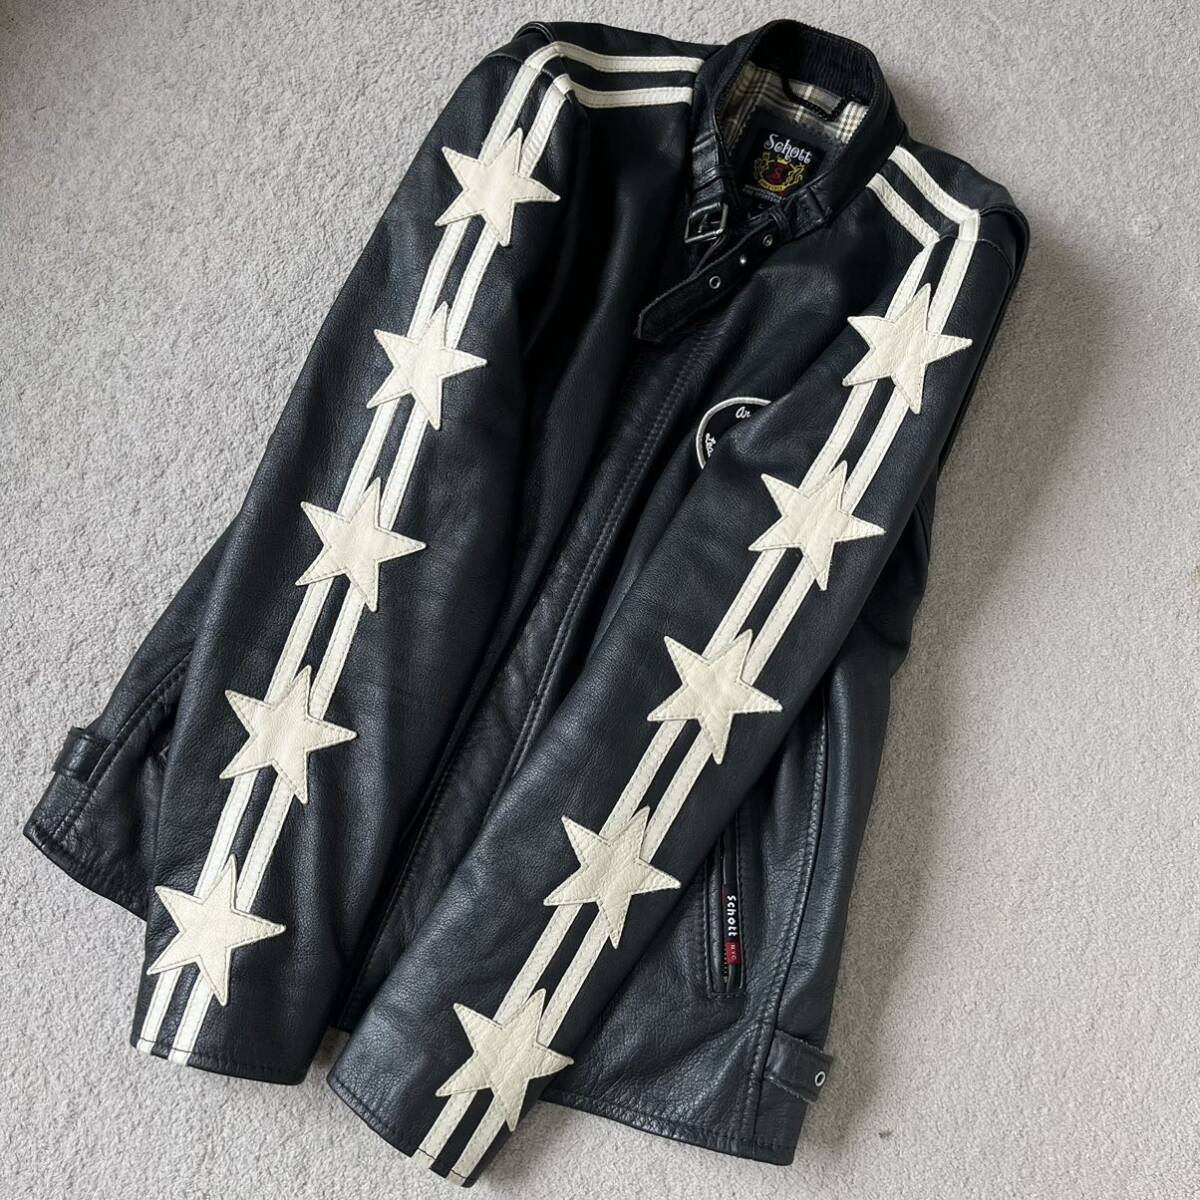 L size 100. year of model * Schott Schott Classic Racer jacket Rider's leather star article flag Star studs check single black 